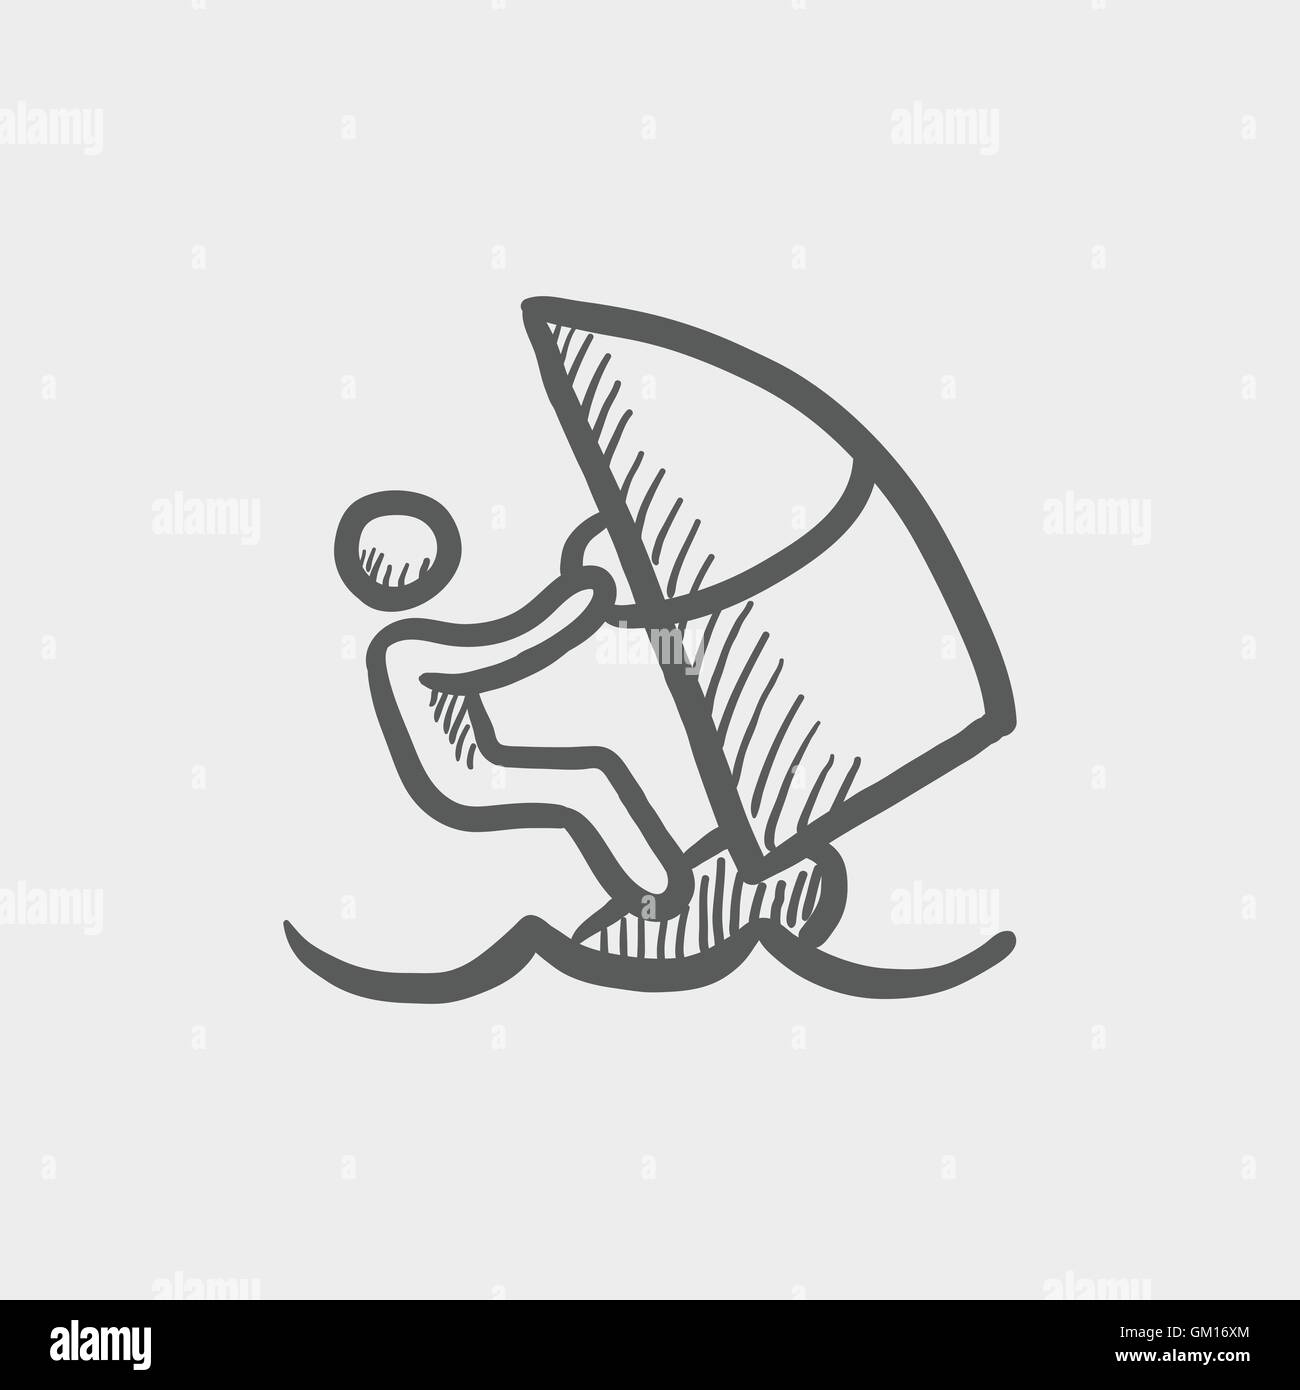 Wind surfing sketch icon Stock Vector